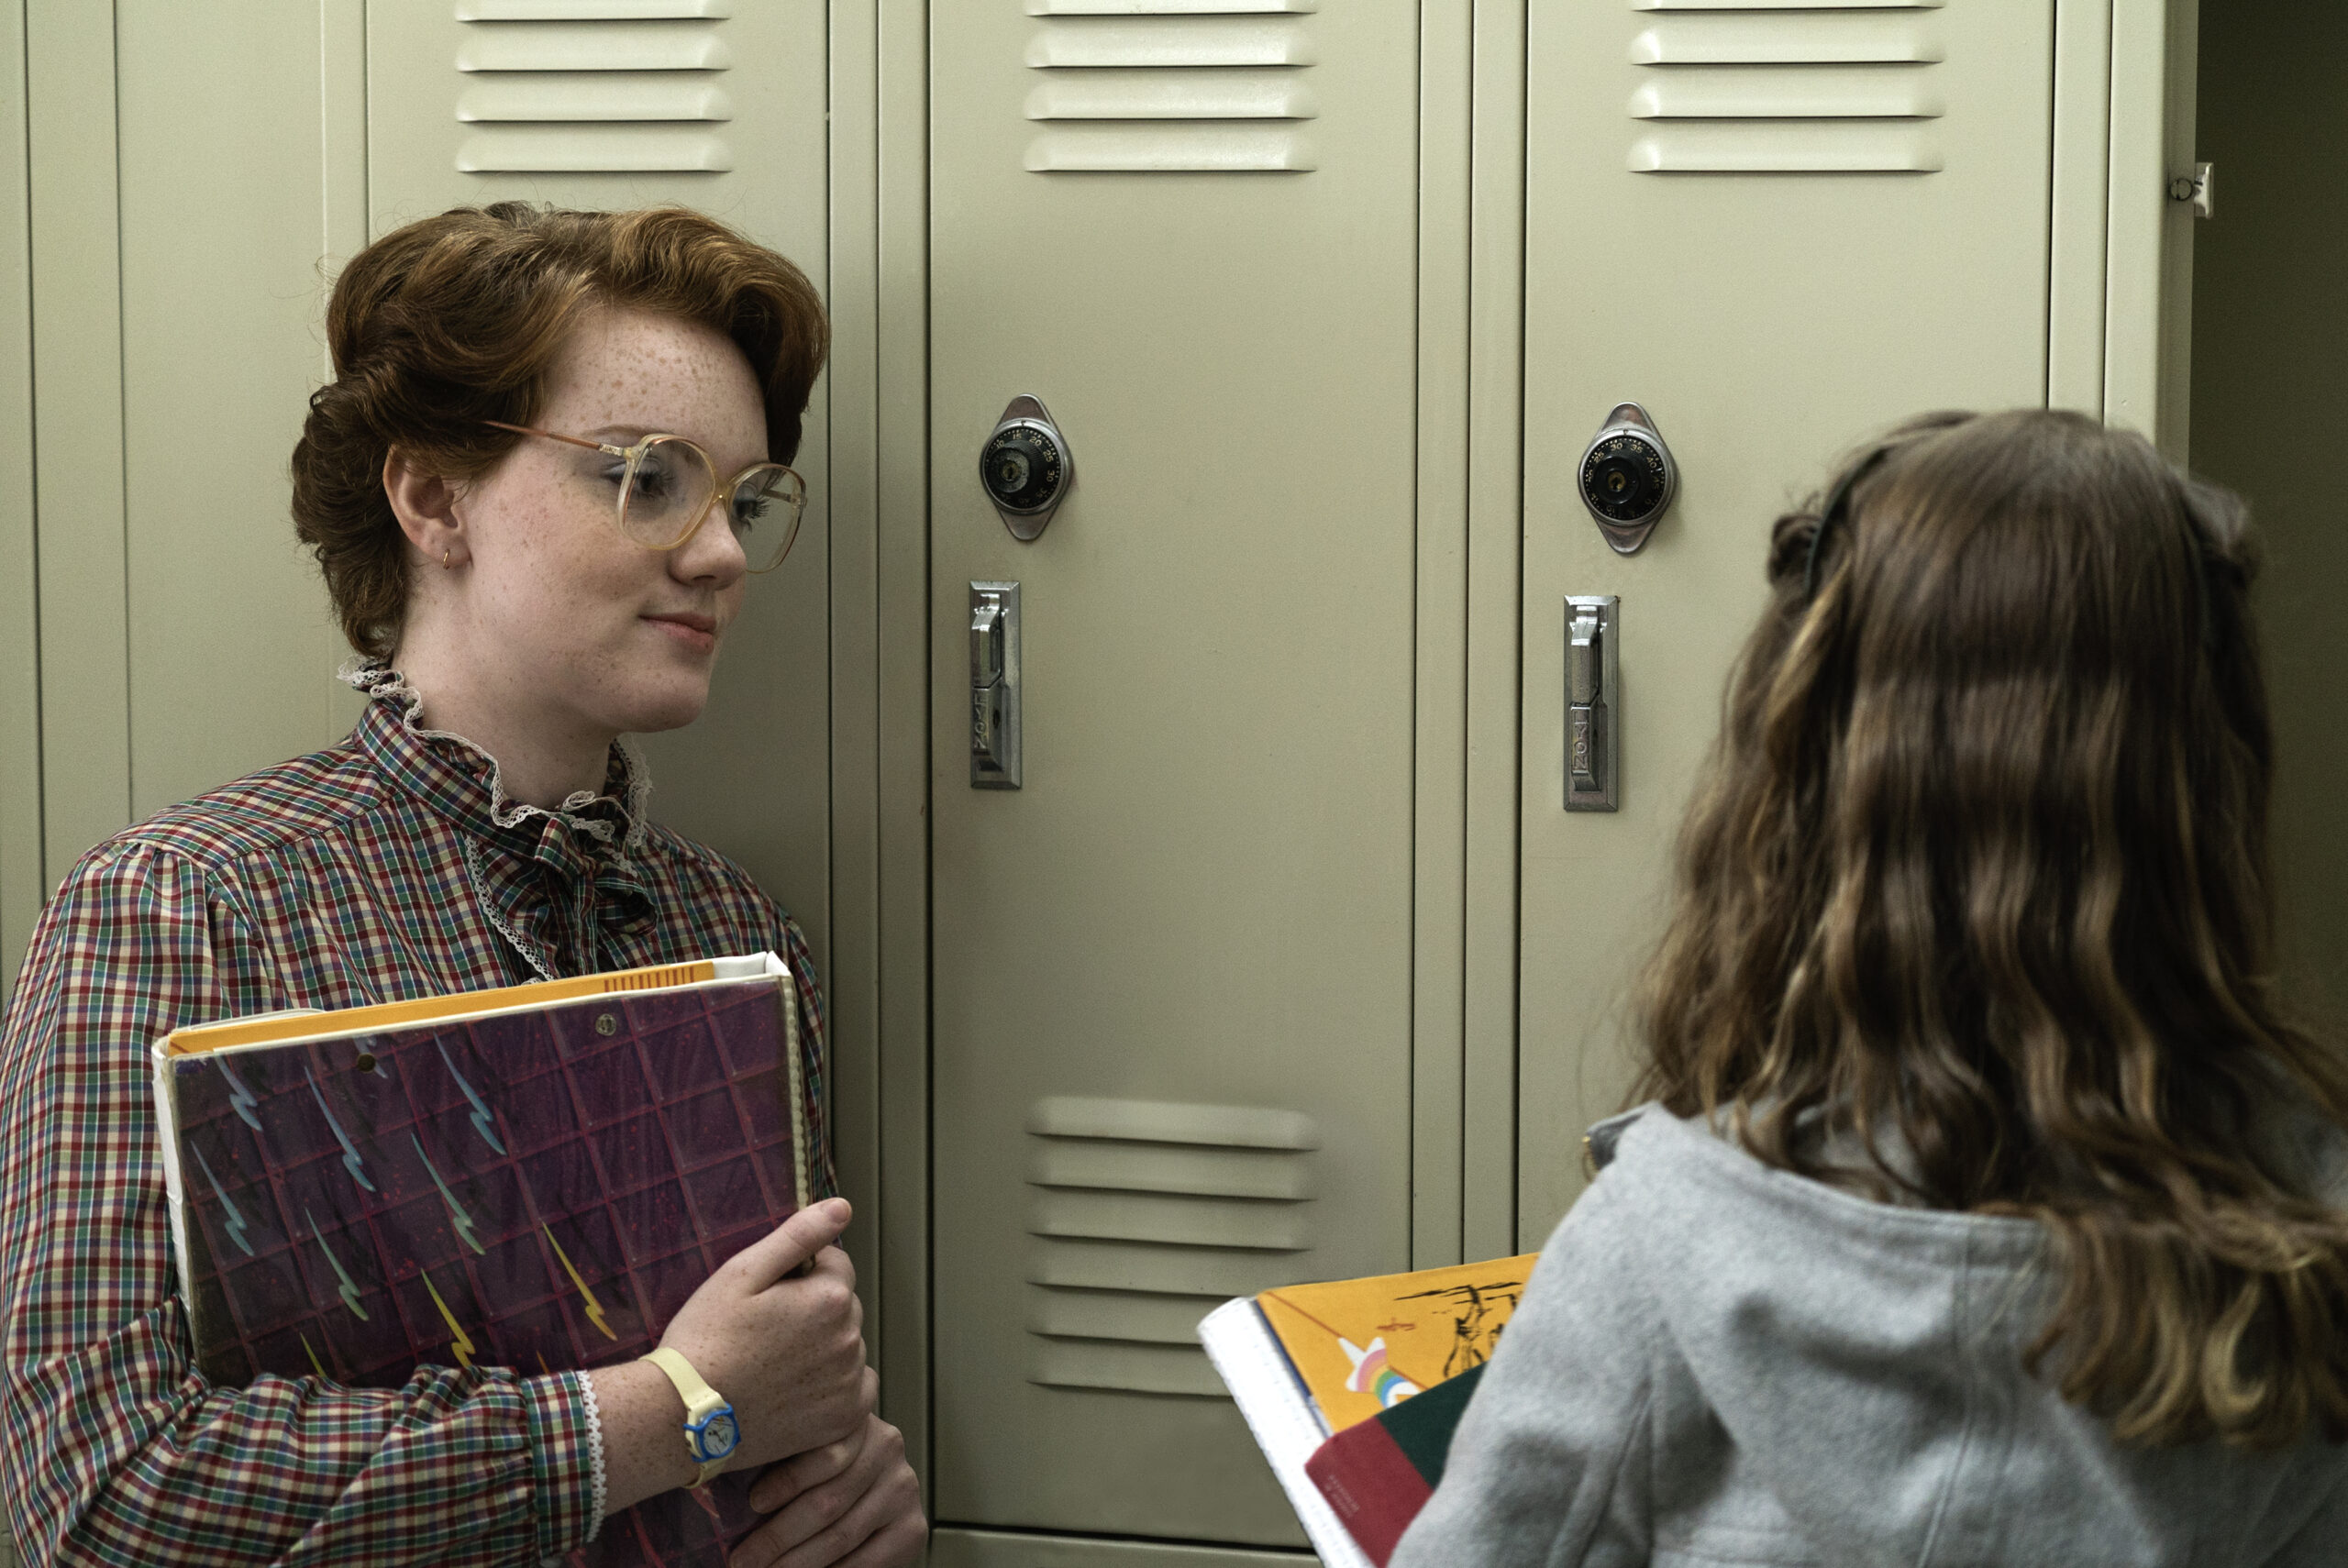 Barb From Stranger Things Has Risen From The DeadIn Riverdale